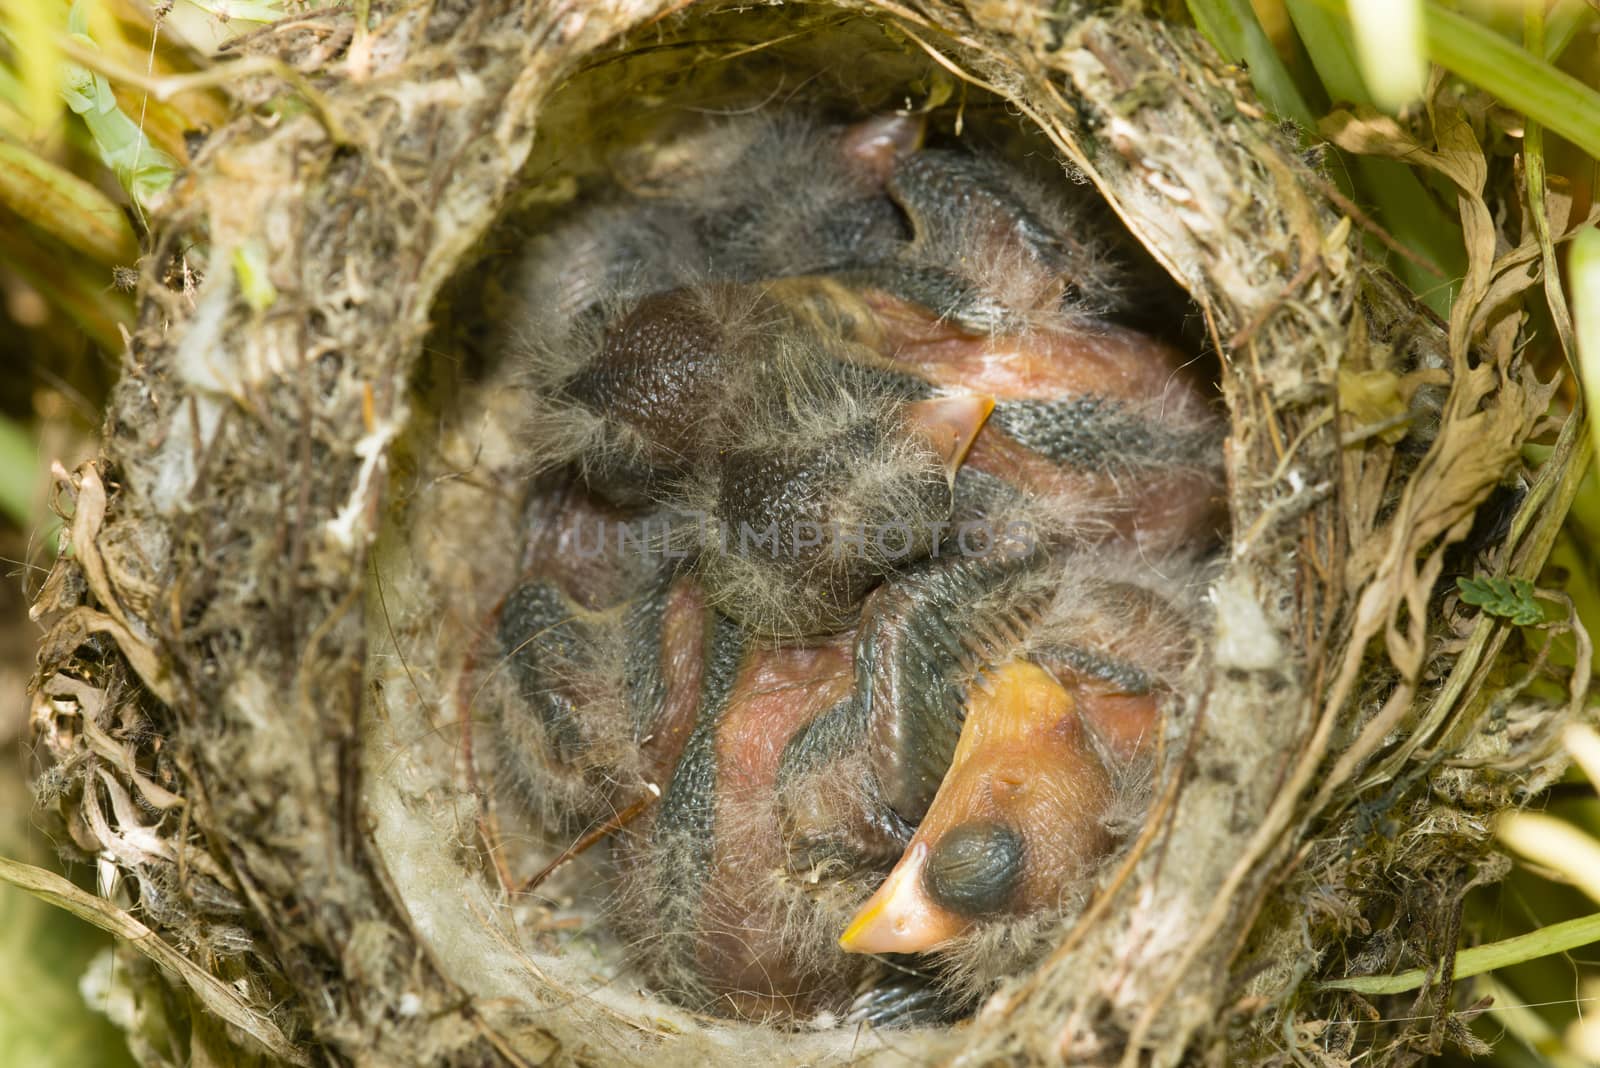 Nest and nestlings of European goldfinch (Carduelis carduelis) by AlessandroZocc